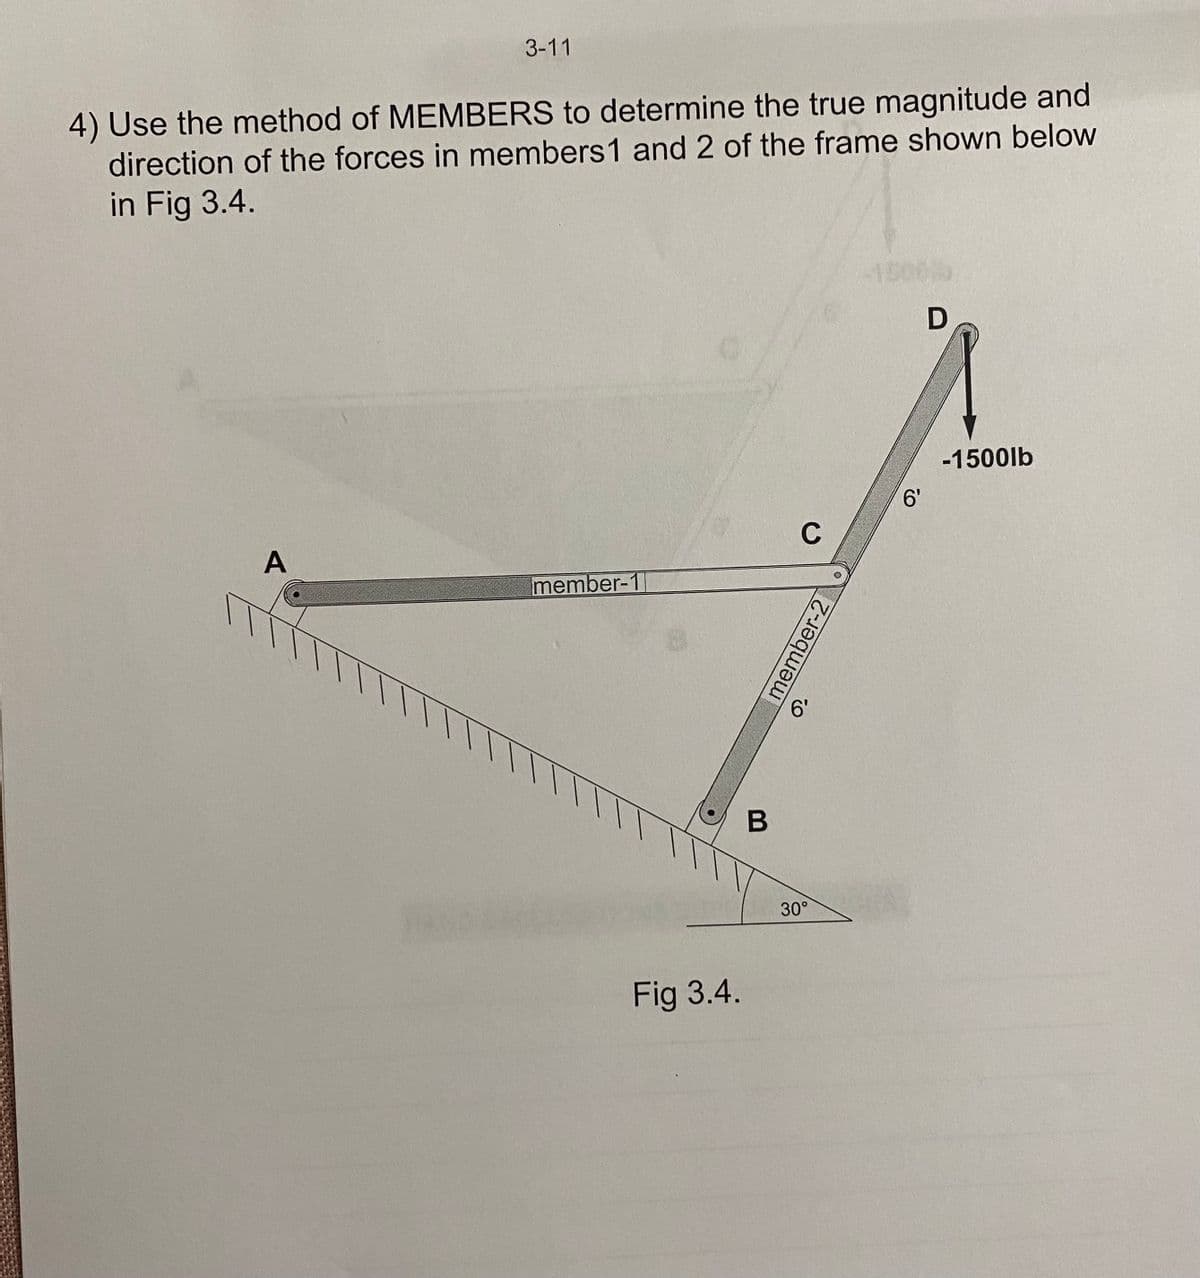 3-11
4) Use the method of MEMBERS to determine the true magnitude and
direction of the forces in members 1 and 2 of the frame shown below
in Fig 3.4.
A
member-1
Fig 3.4.
B
C
6'
30°
member-2
6'
D
-1500lb